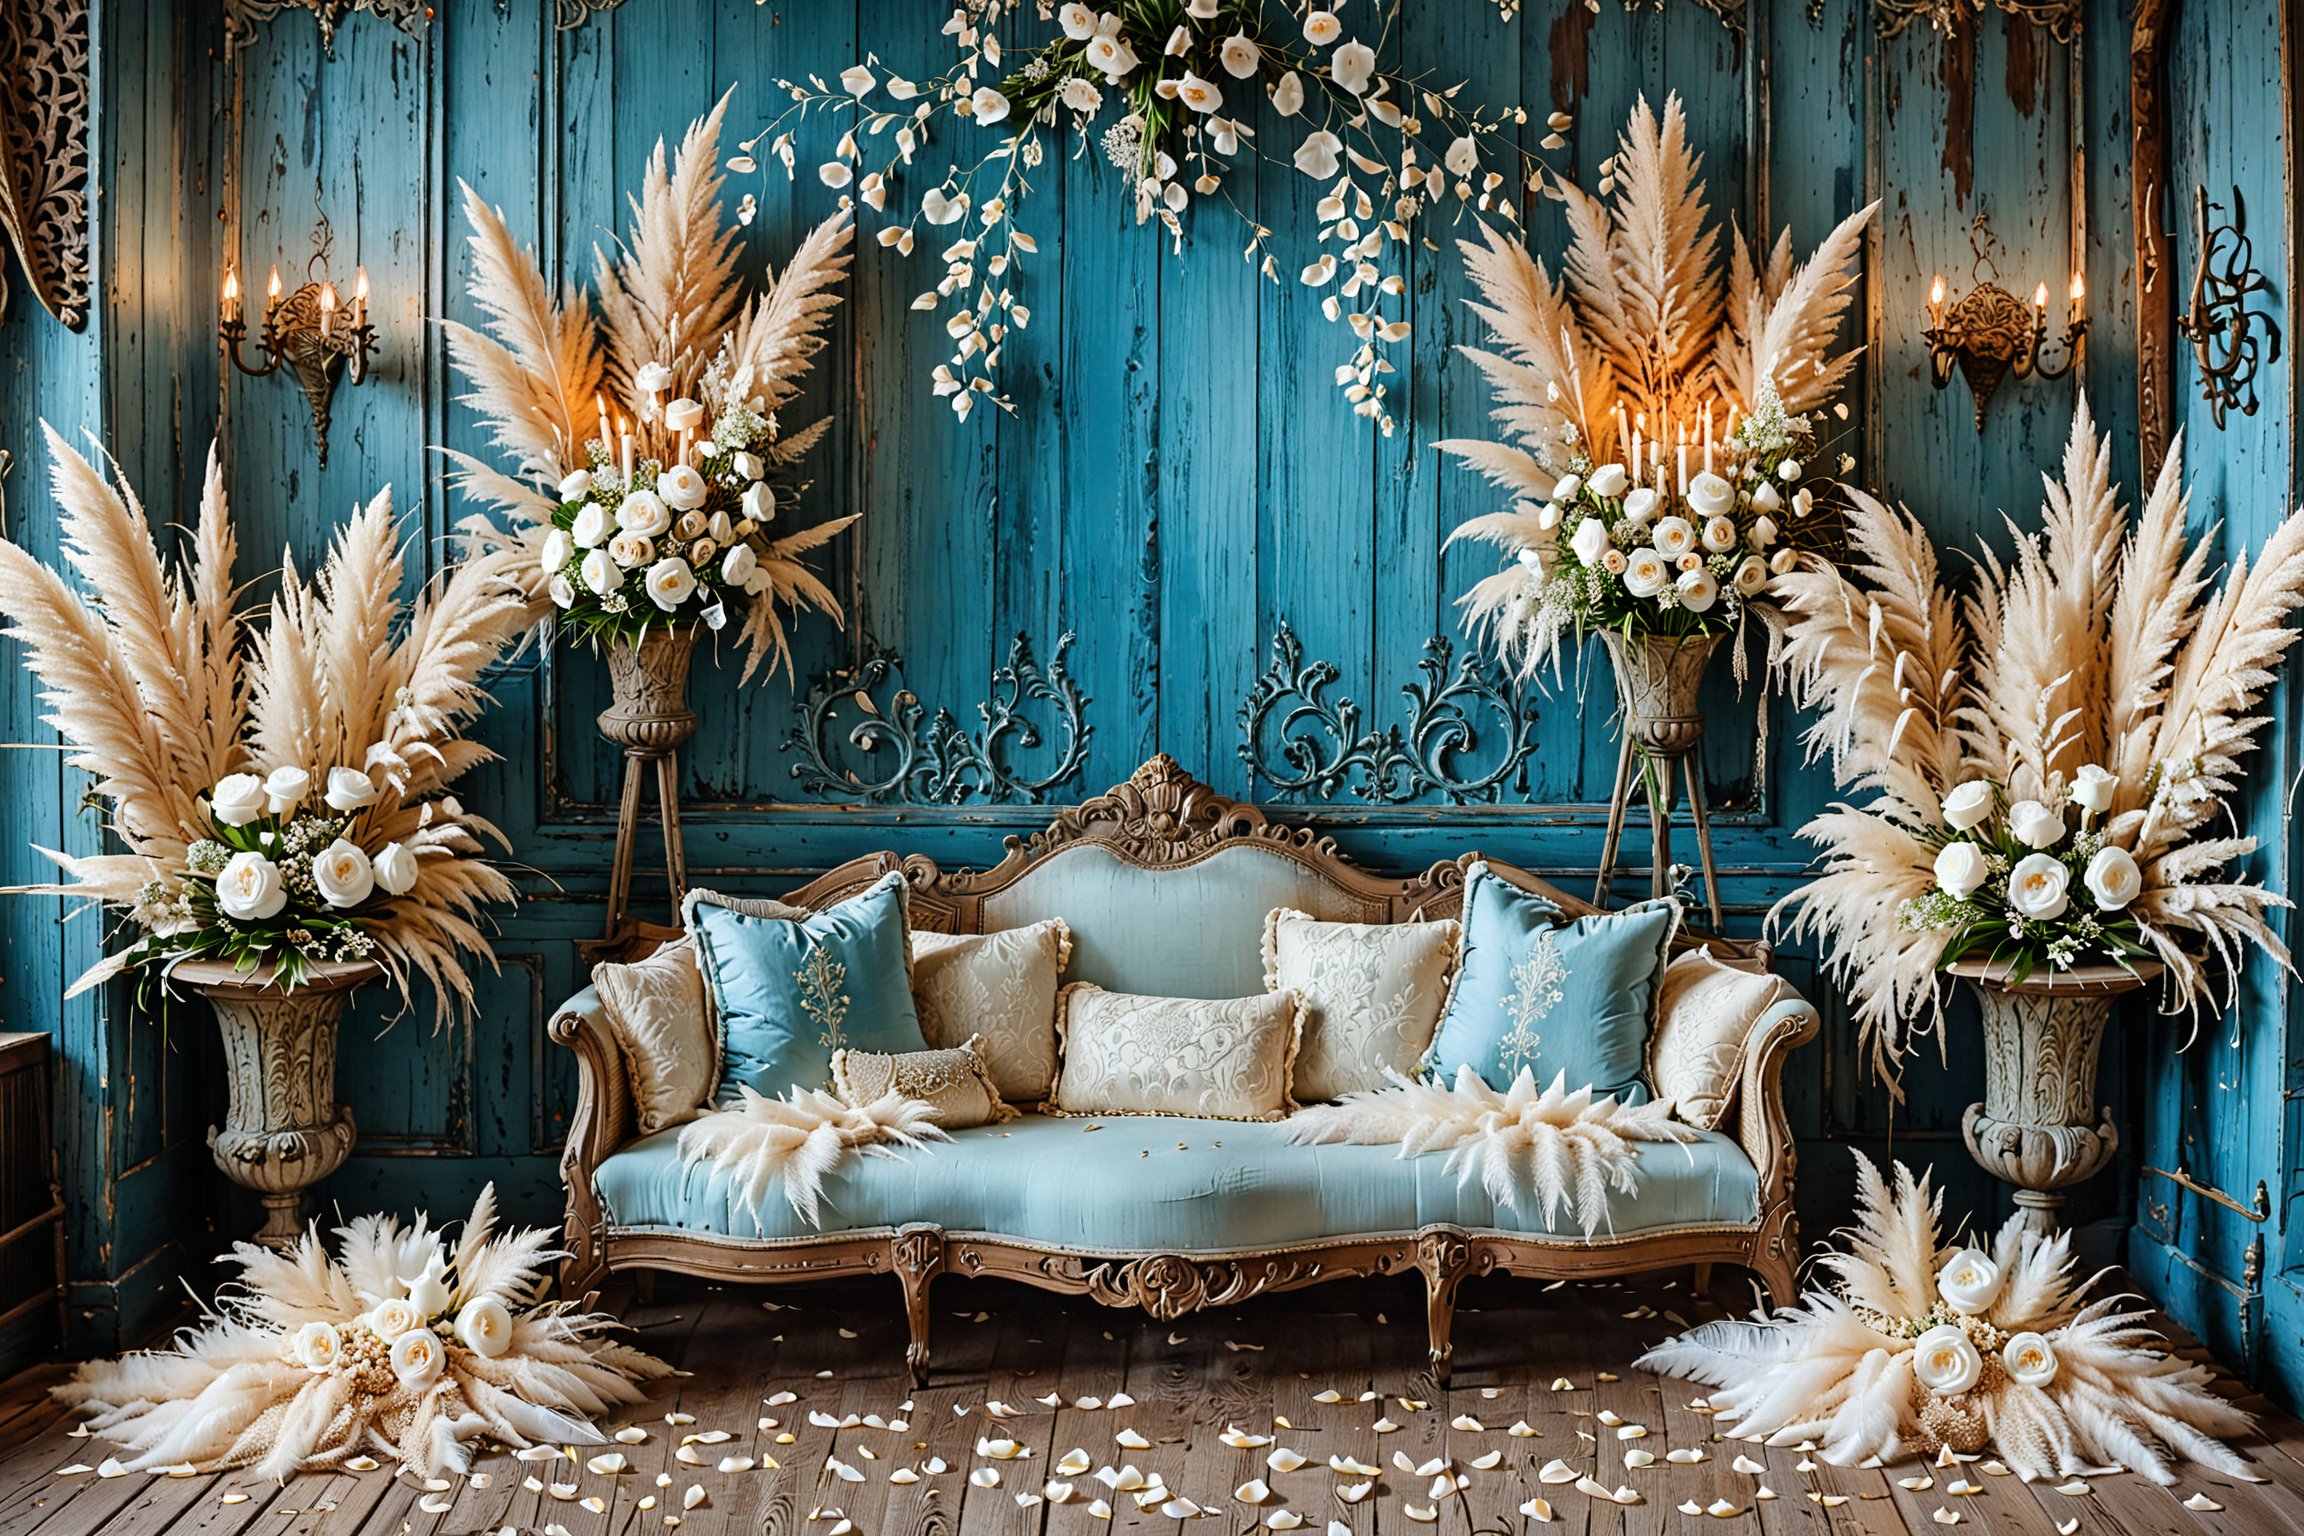 A vintage-styled room with a blue wooden wall adorned with ornate wall sconces. A floral arrangement hangs from the ceiling, and tall pampas grass stands majestically on either side of the room. In the center, there's a plush, antique-looking sofa with white and beige cushions. Scattered around the sofa are white rose petals on the wooden floor, and a few candles provide a soft glow. The overall ambiance is romantic and serene.